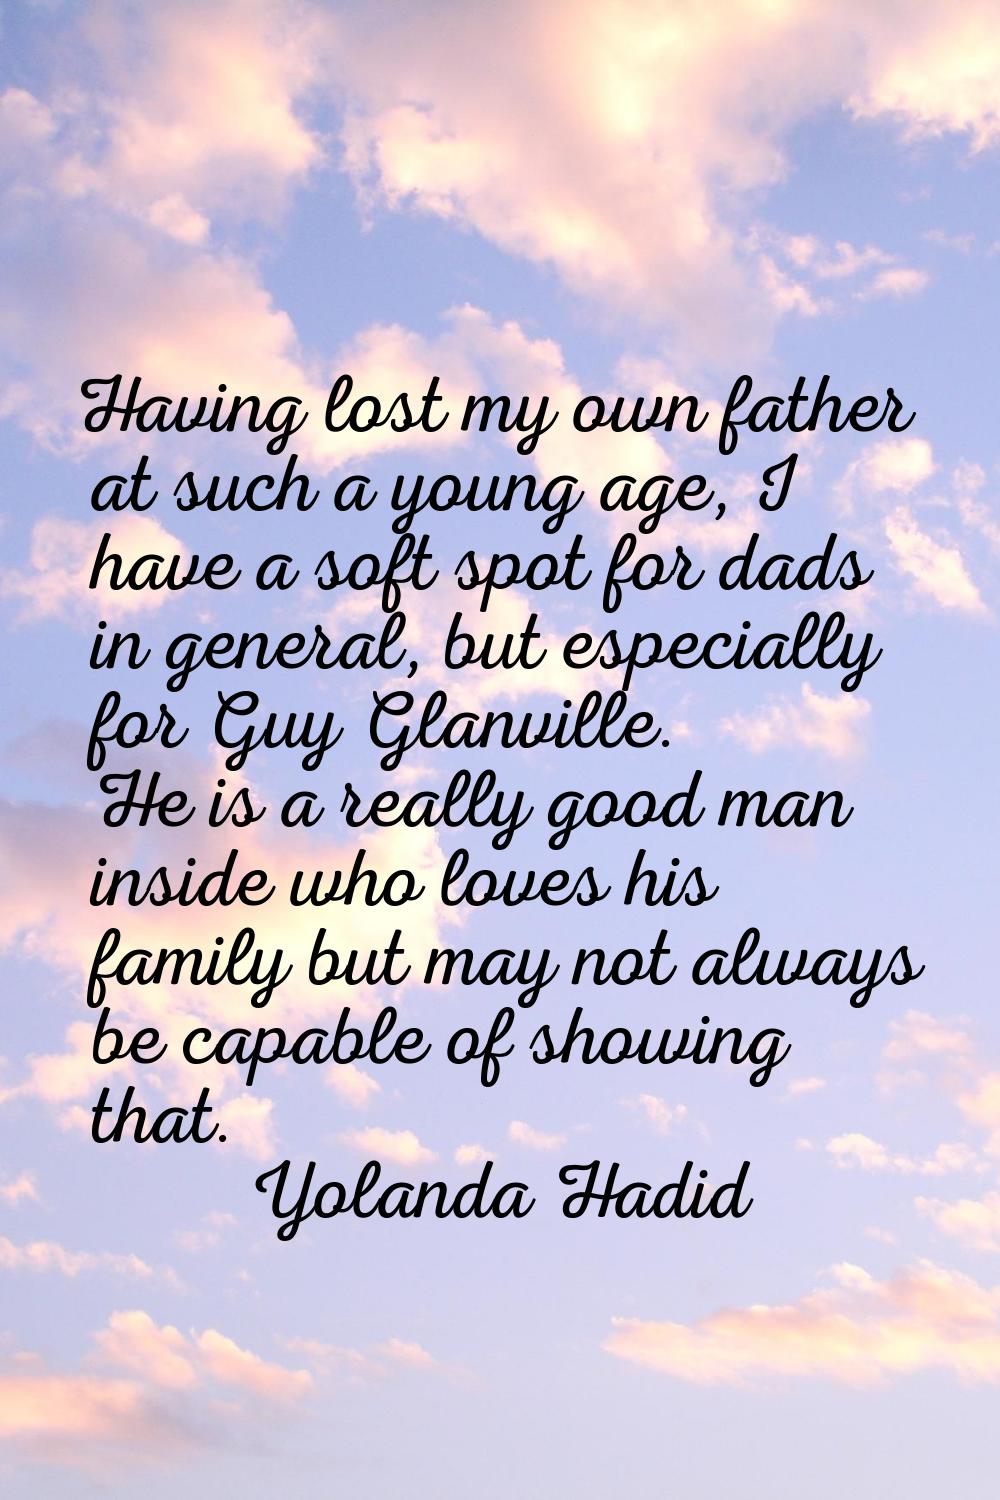 Having lost my own father at such a young age, I have a soft spot for dads in general, but especial